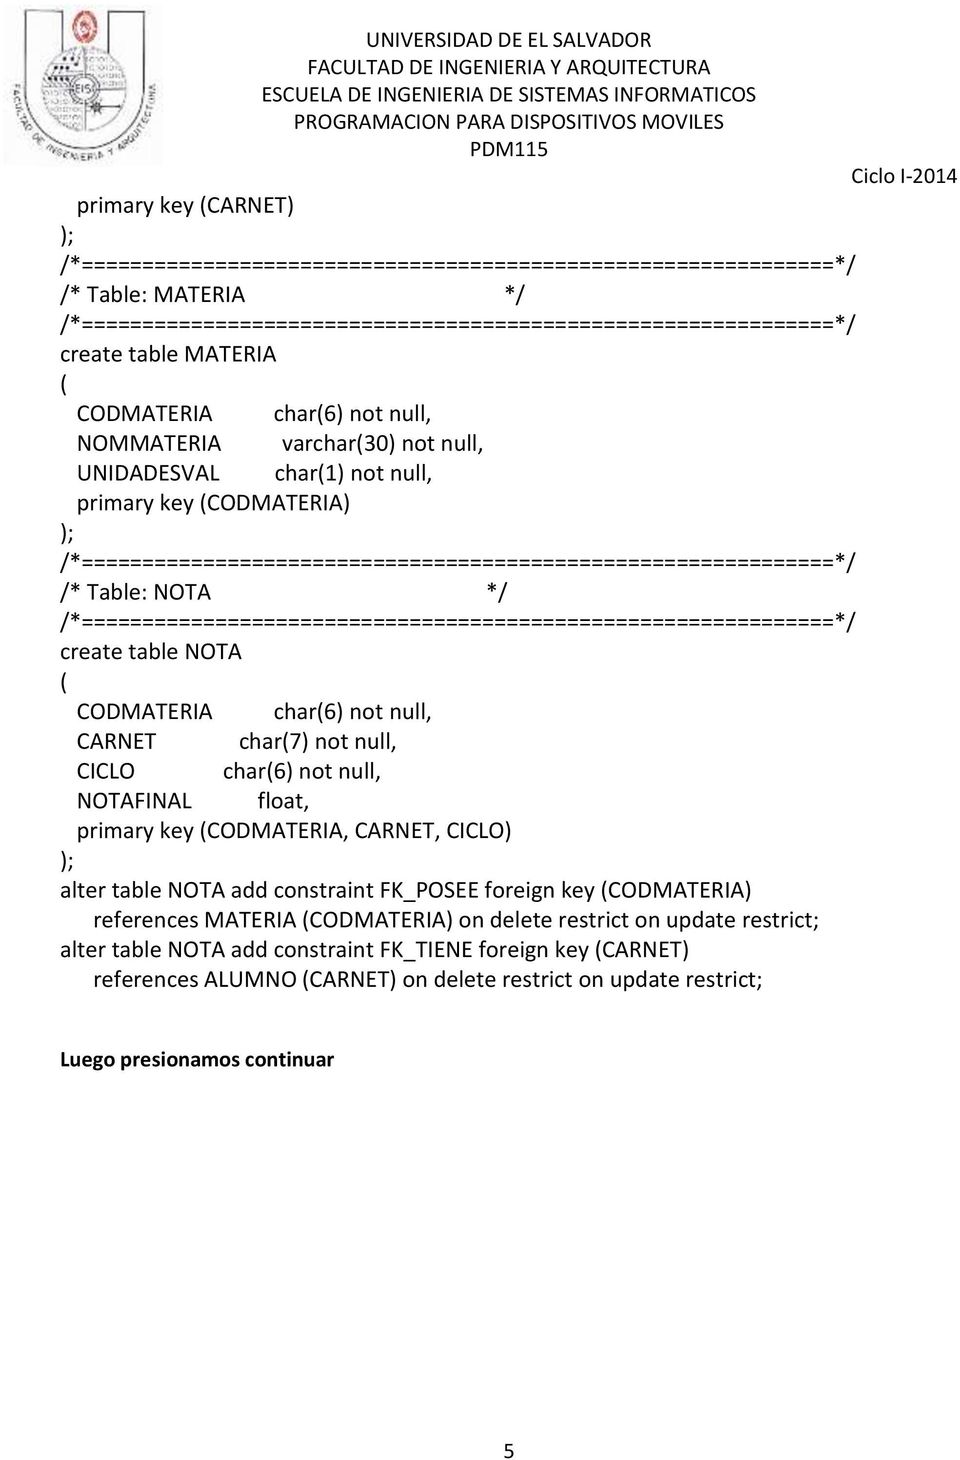 NOTA */ /*==============================================================*/ create table NOTA ( CODMATERIA char(6) not null, CARNET char(7) not null, CICLO char(6) not null, NOTAFINAL float, primary